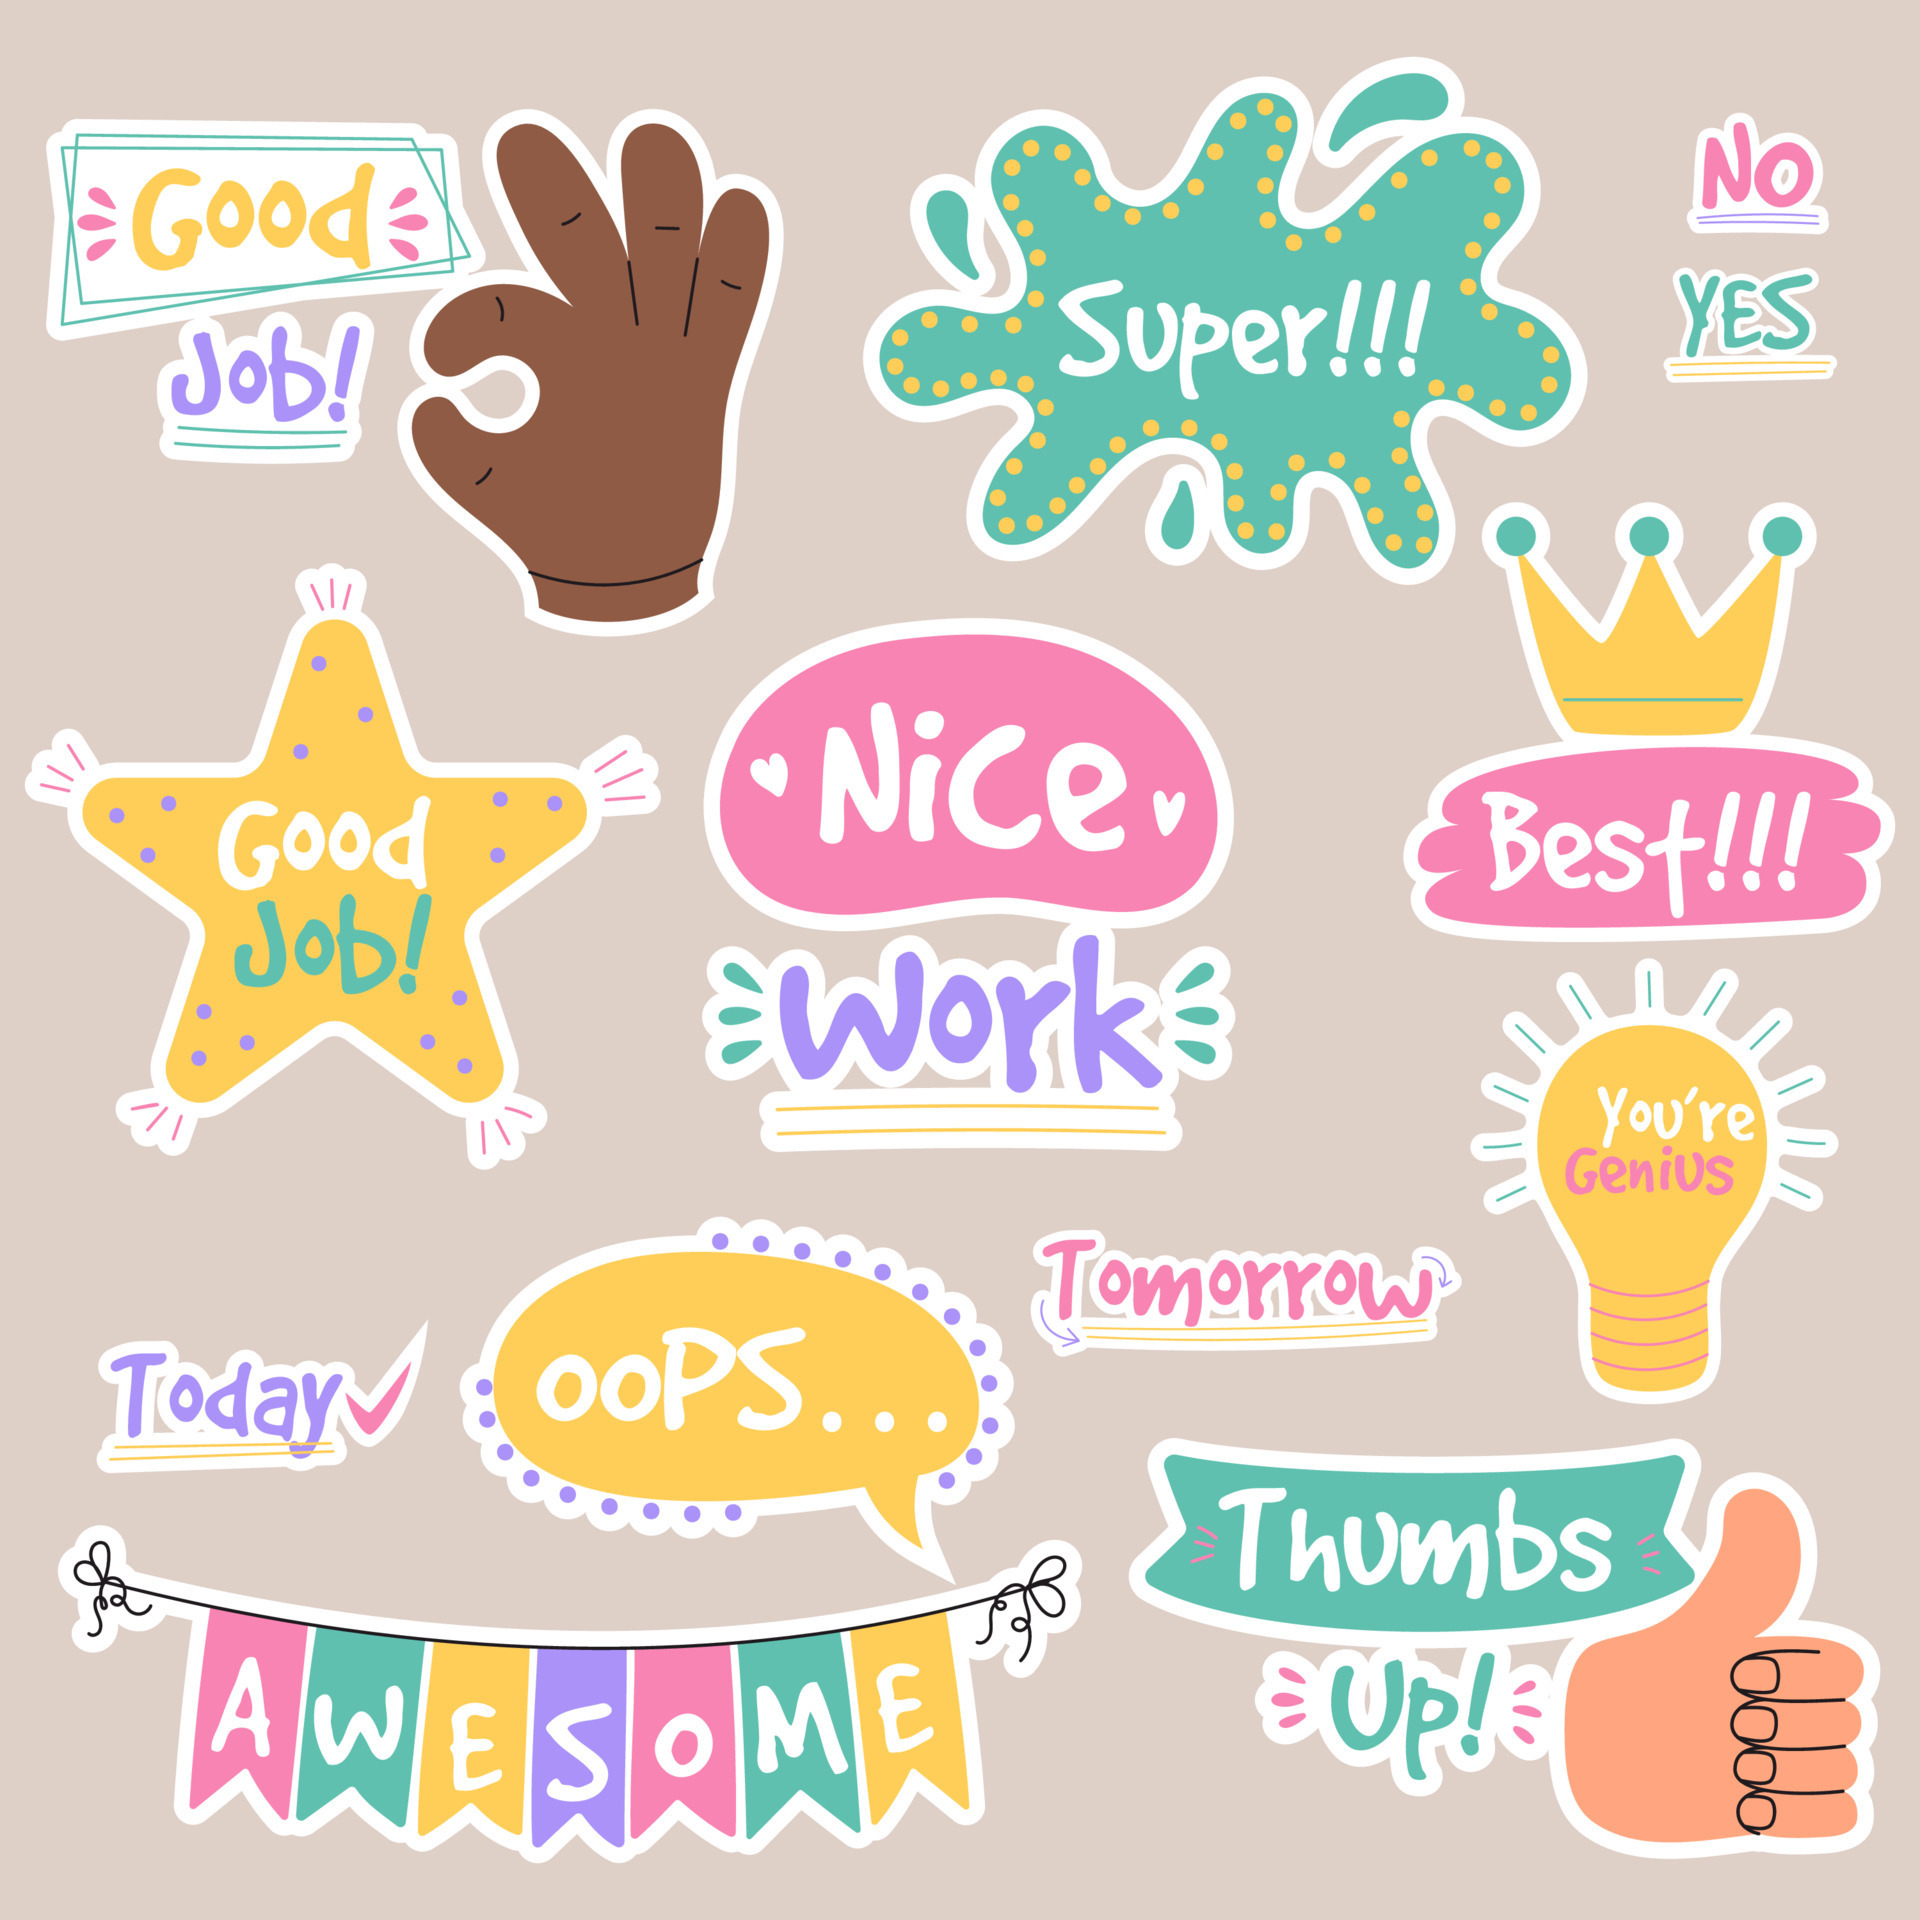 https://static.vecteezy.com/system/resources/previews/015/716/428/original/job-and-great-job-groovy-stickers-pack-set-of-reward-stickers-for-teachers-and-kids-hand-drawn-illustration-vector.jpg